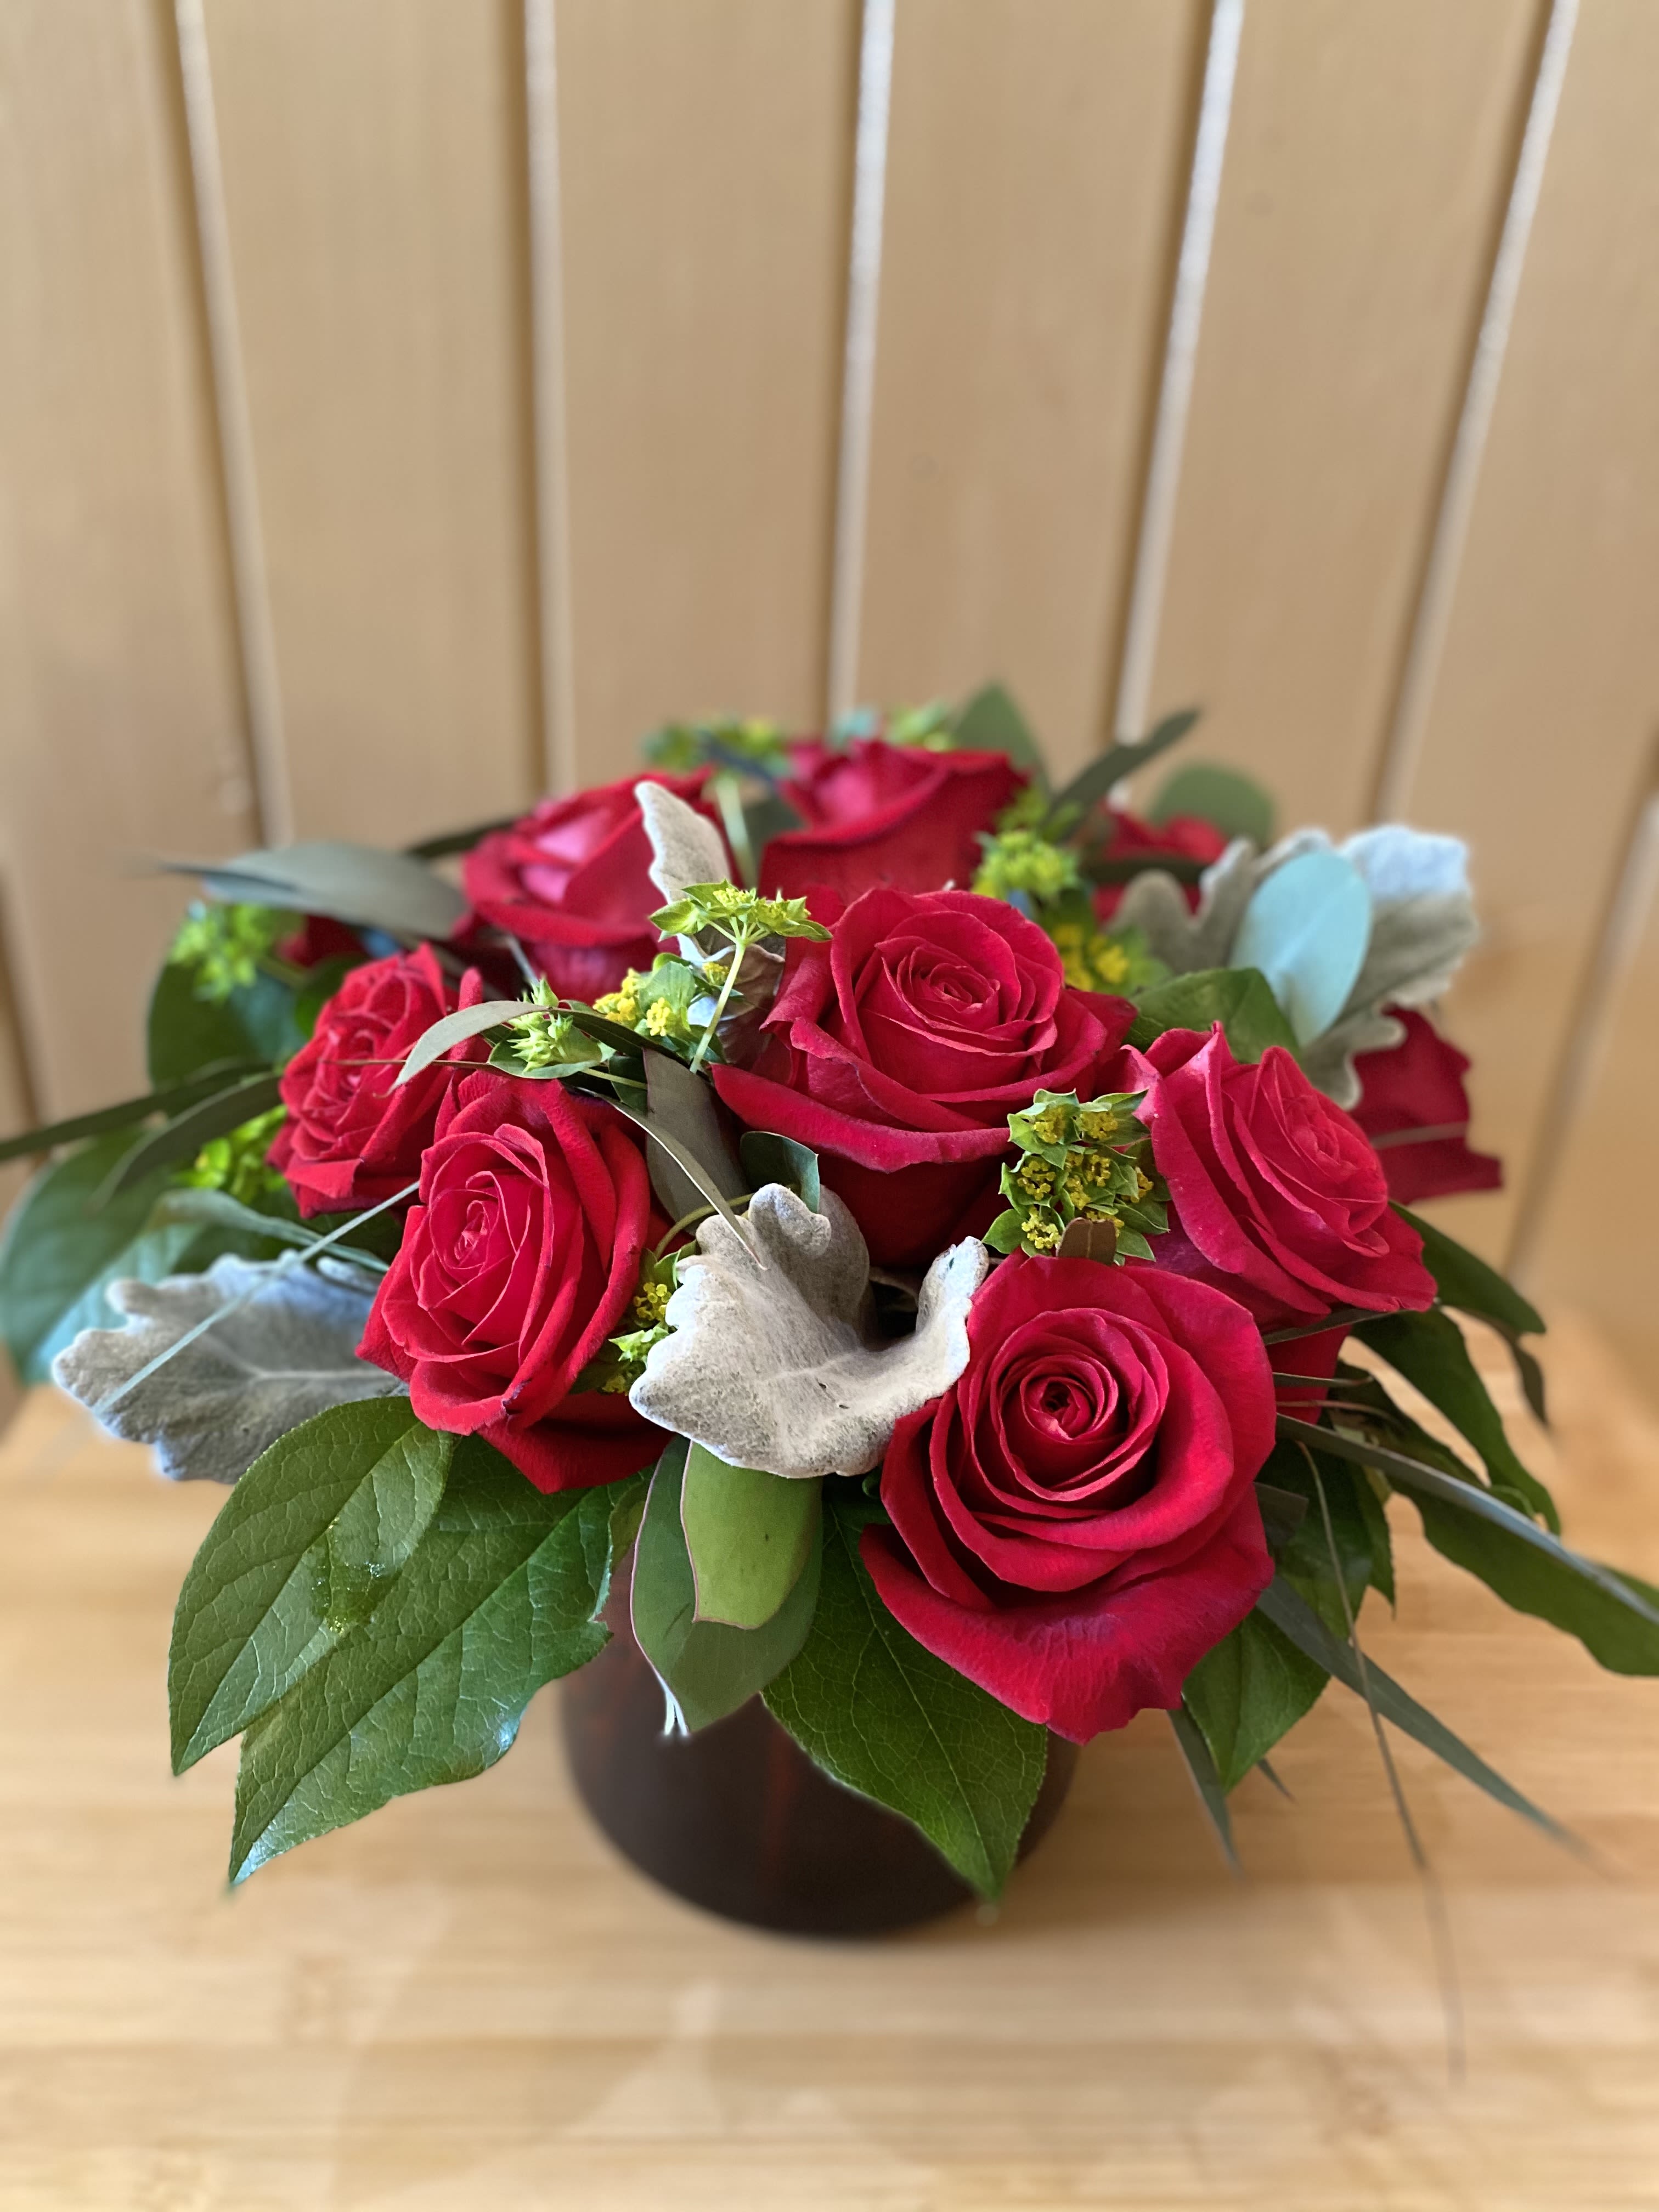 Modern Love - A different take on a dozen roses.  Presented in a cropped red cylinder vase, and accented with eucalyptus and silver foliage.  Perfection in simplicity.   (Upgraded pricing will include more roses and curly willow accents.)